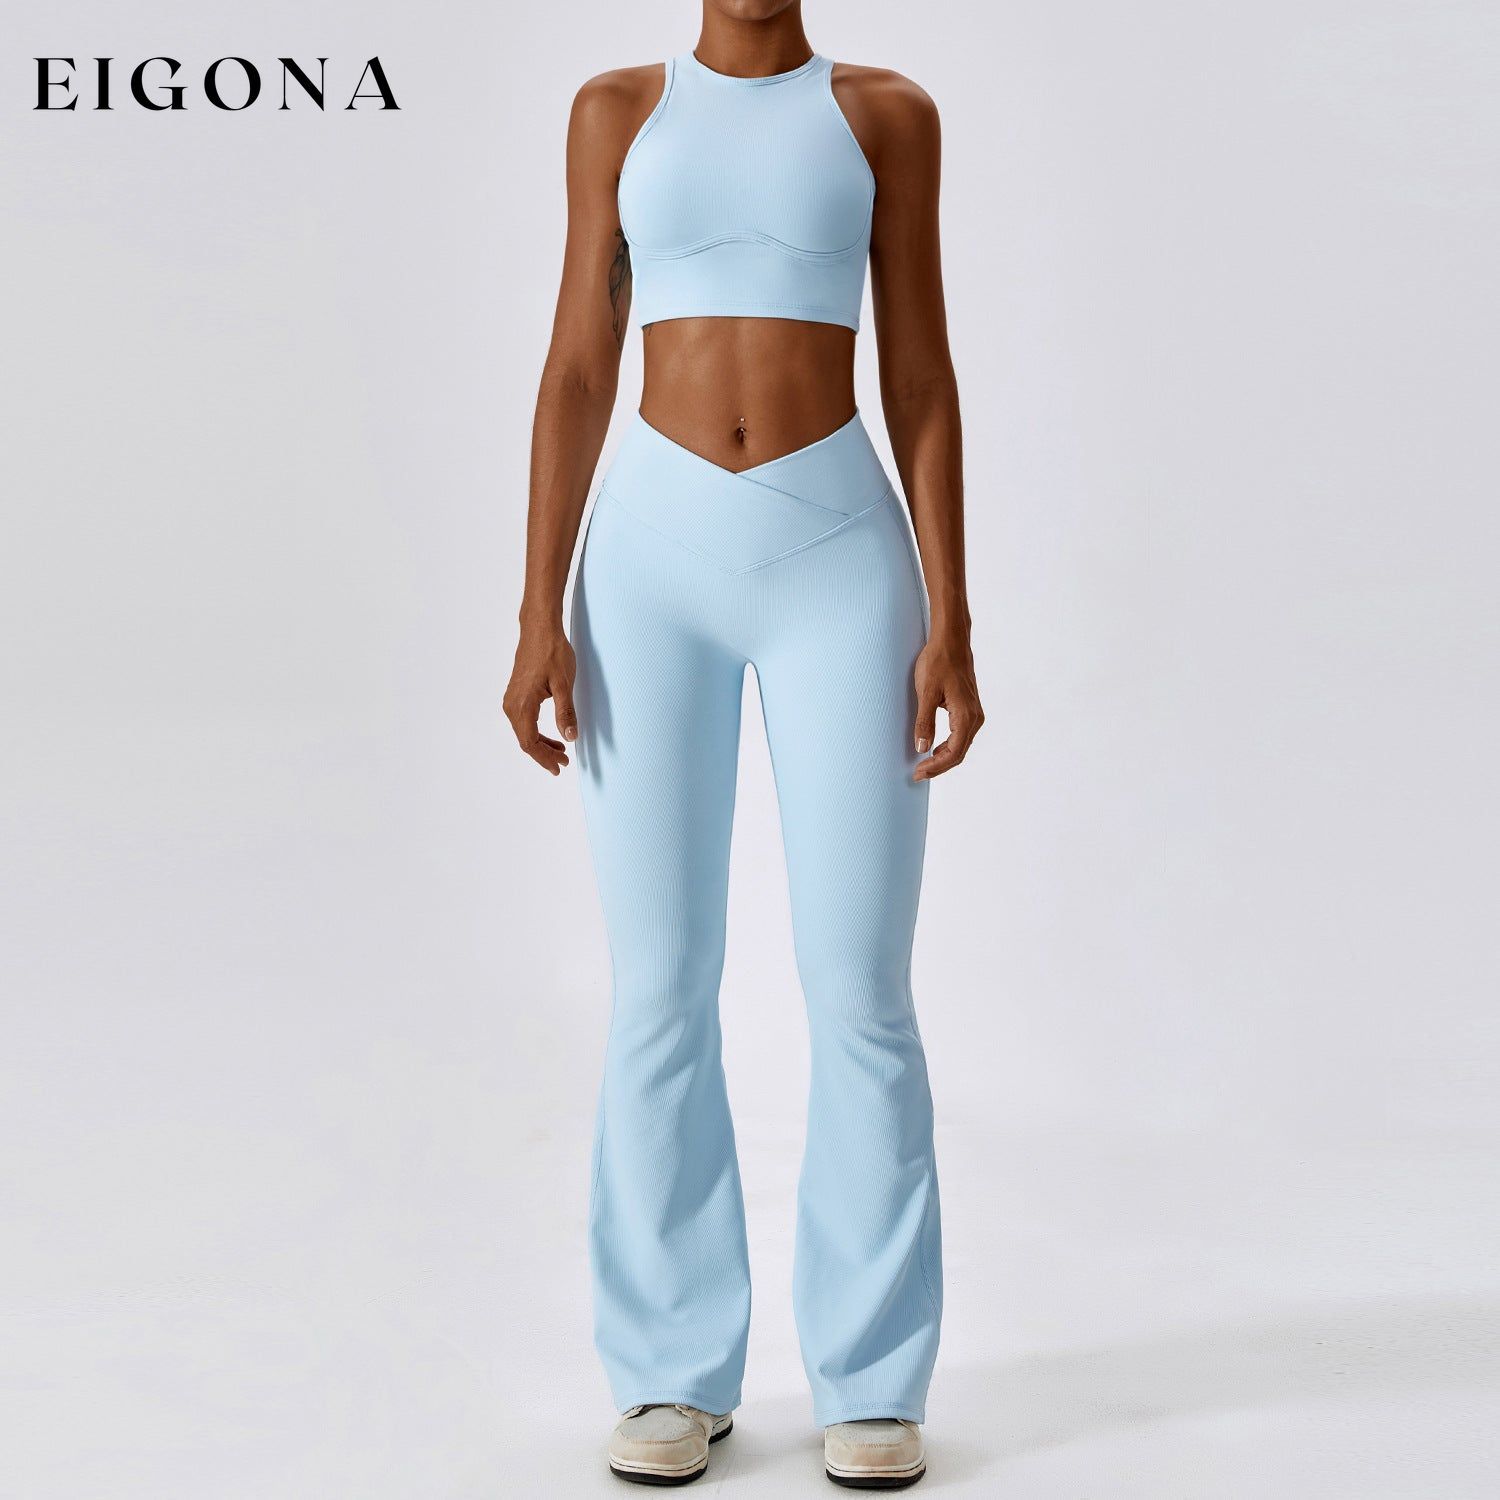 Thread Abdominal Shaping High Waist Beauty Back Yoga Suit Quick Drying Push up Hip Raise Skinny Workout Exercise Outfit -2 Bra Bell-Bottom Pants Sky Blue 2 piece activewear clothes set workout